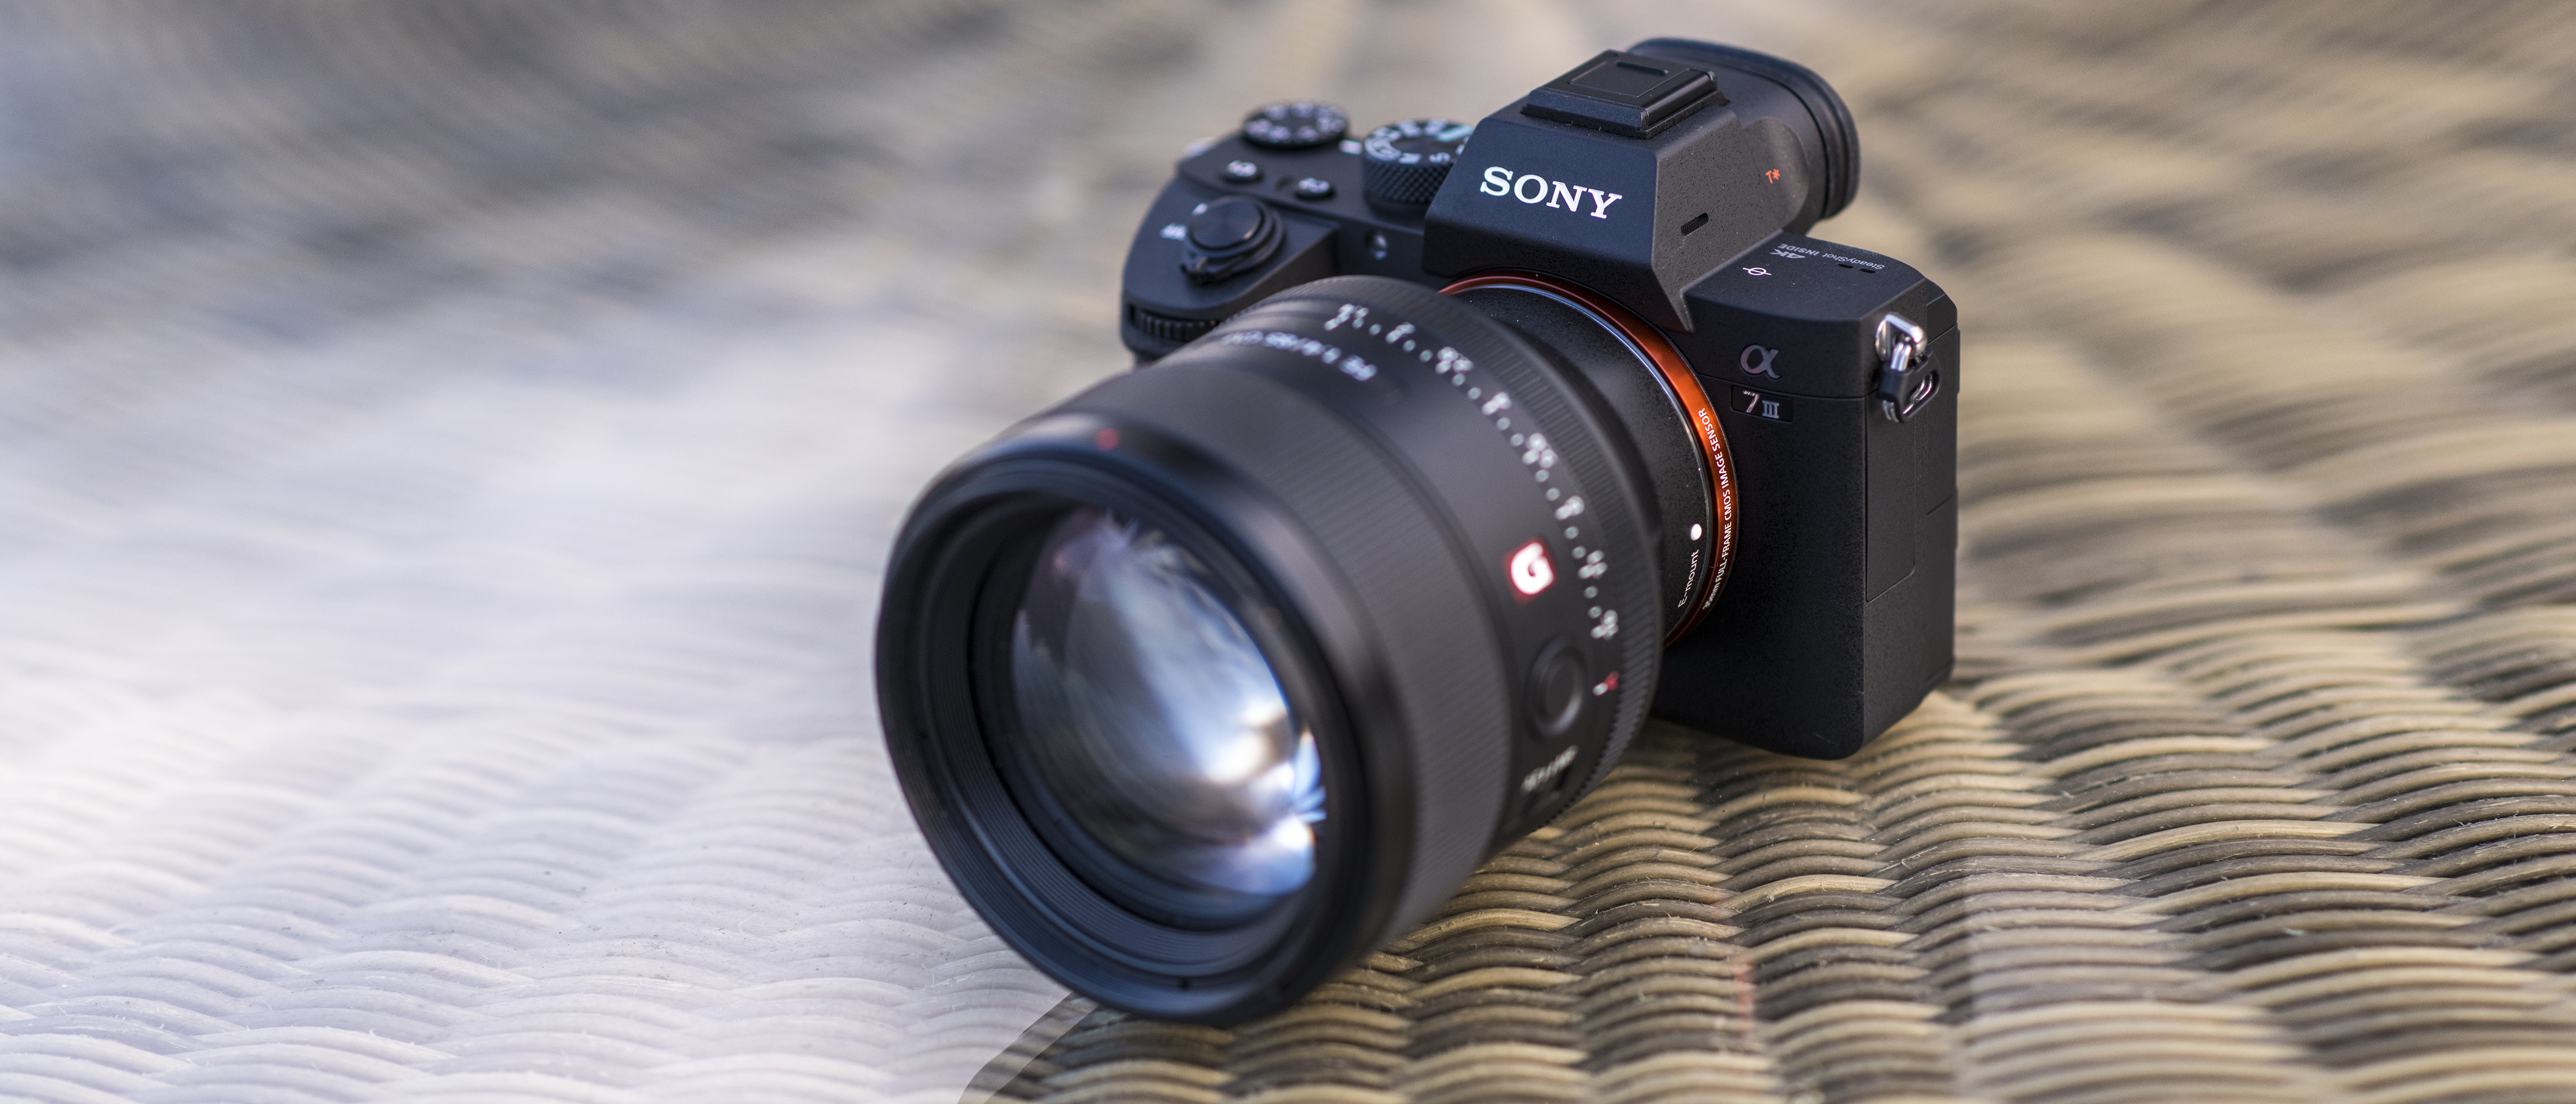 Sony Alpha A7 III review